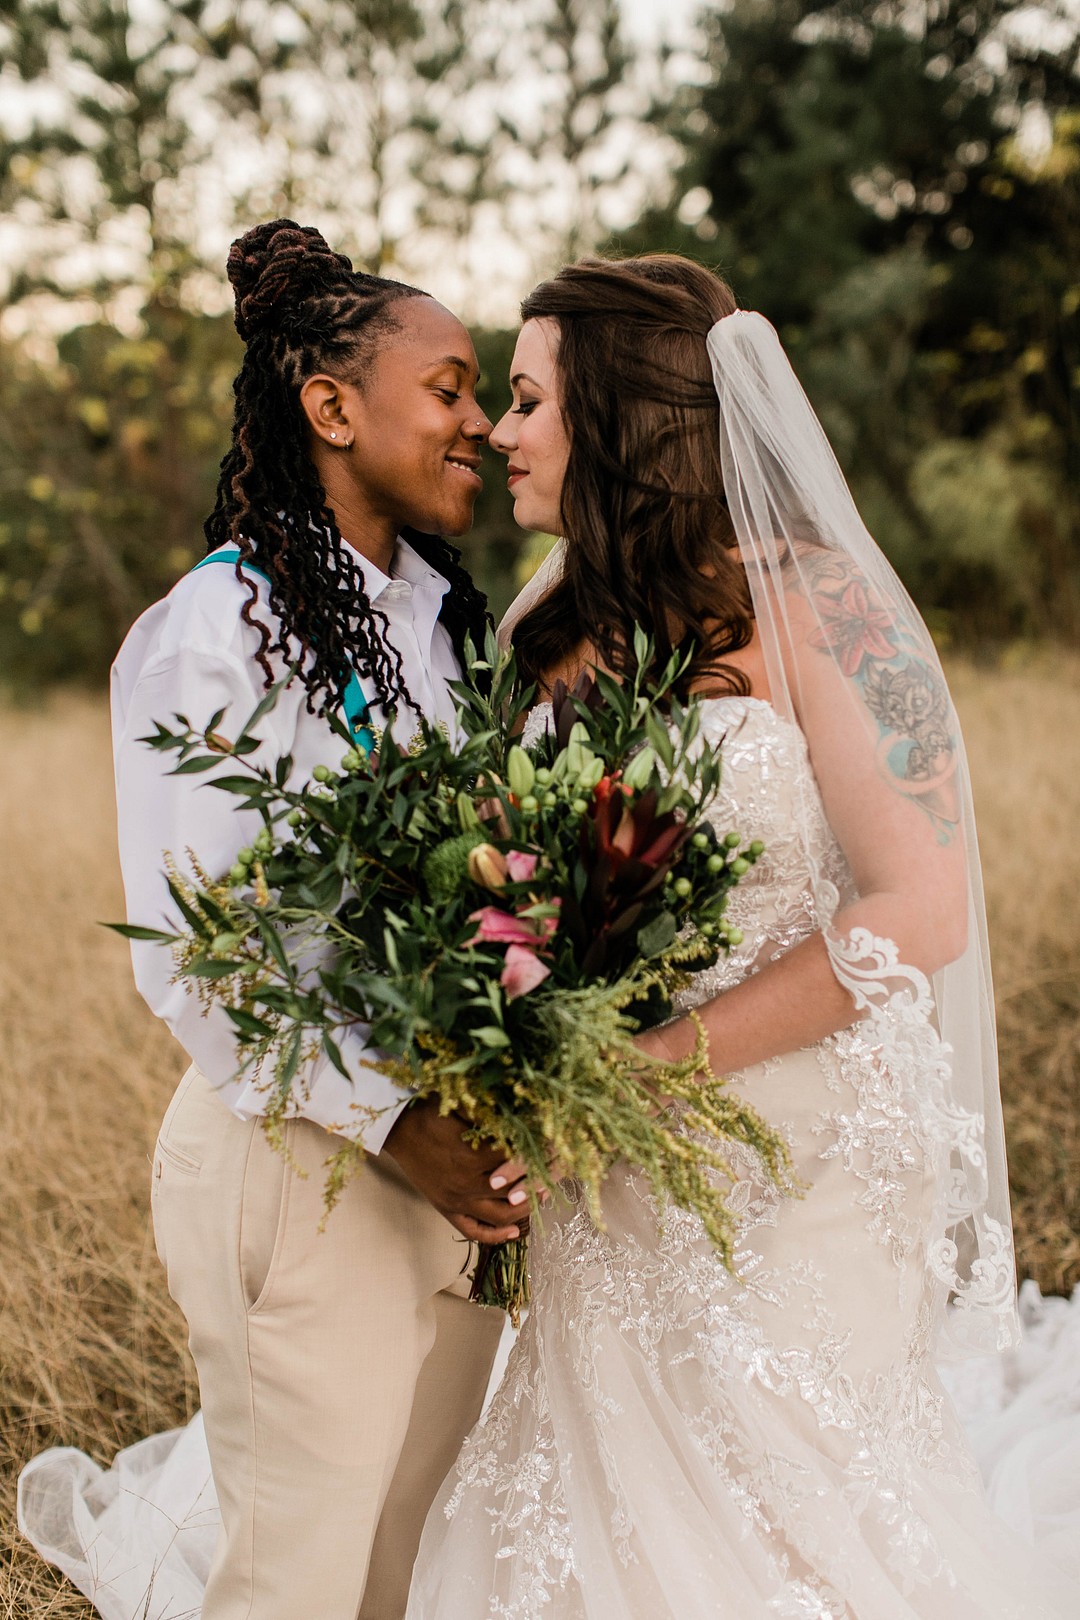 Bohemian winter elopement photos in Irmo, South Carolina LGBTQ+ weddings kiss elope intimate wedding celebration inspiration styled shoot real couple two brides